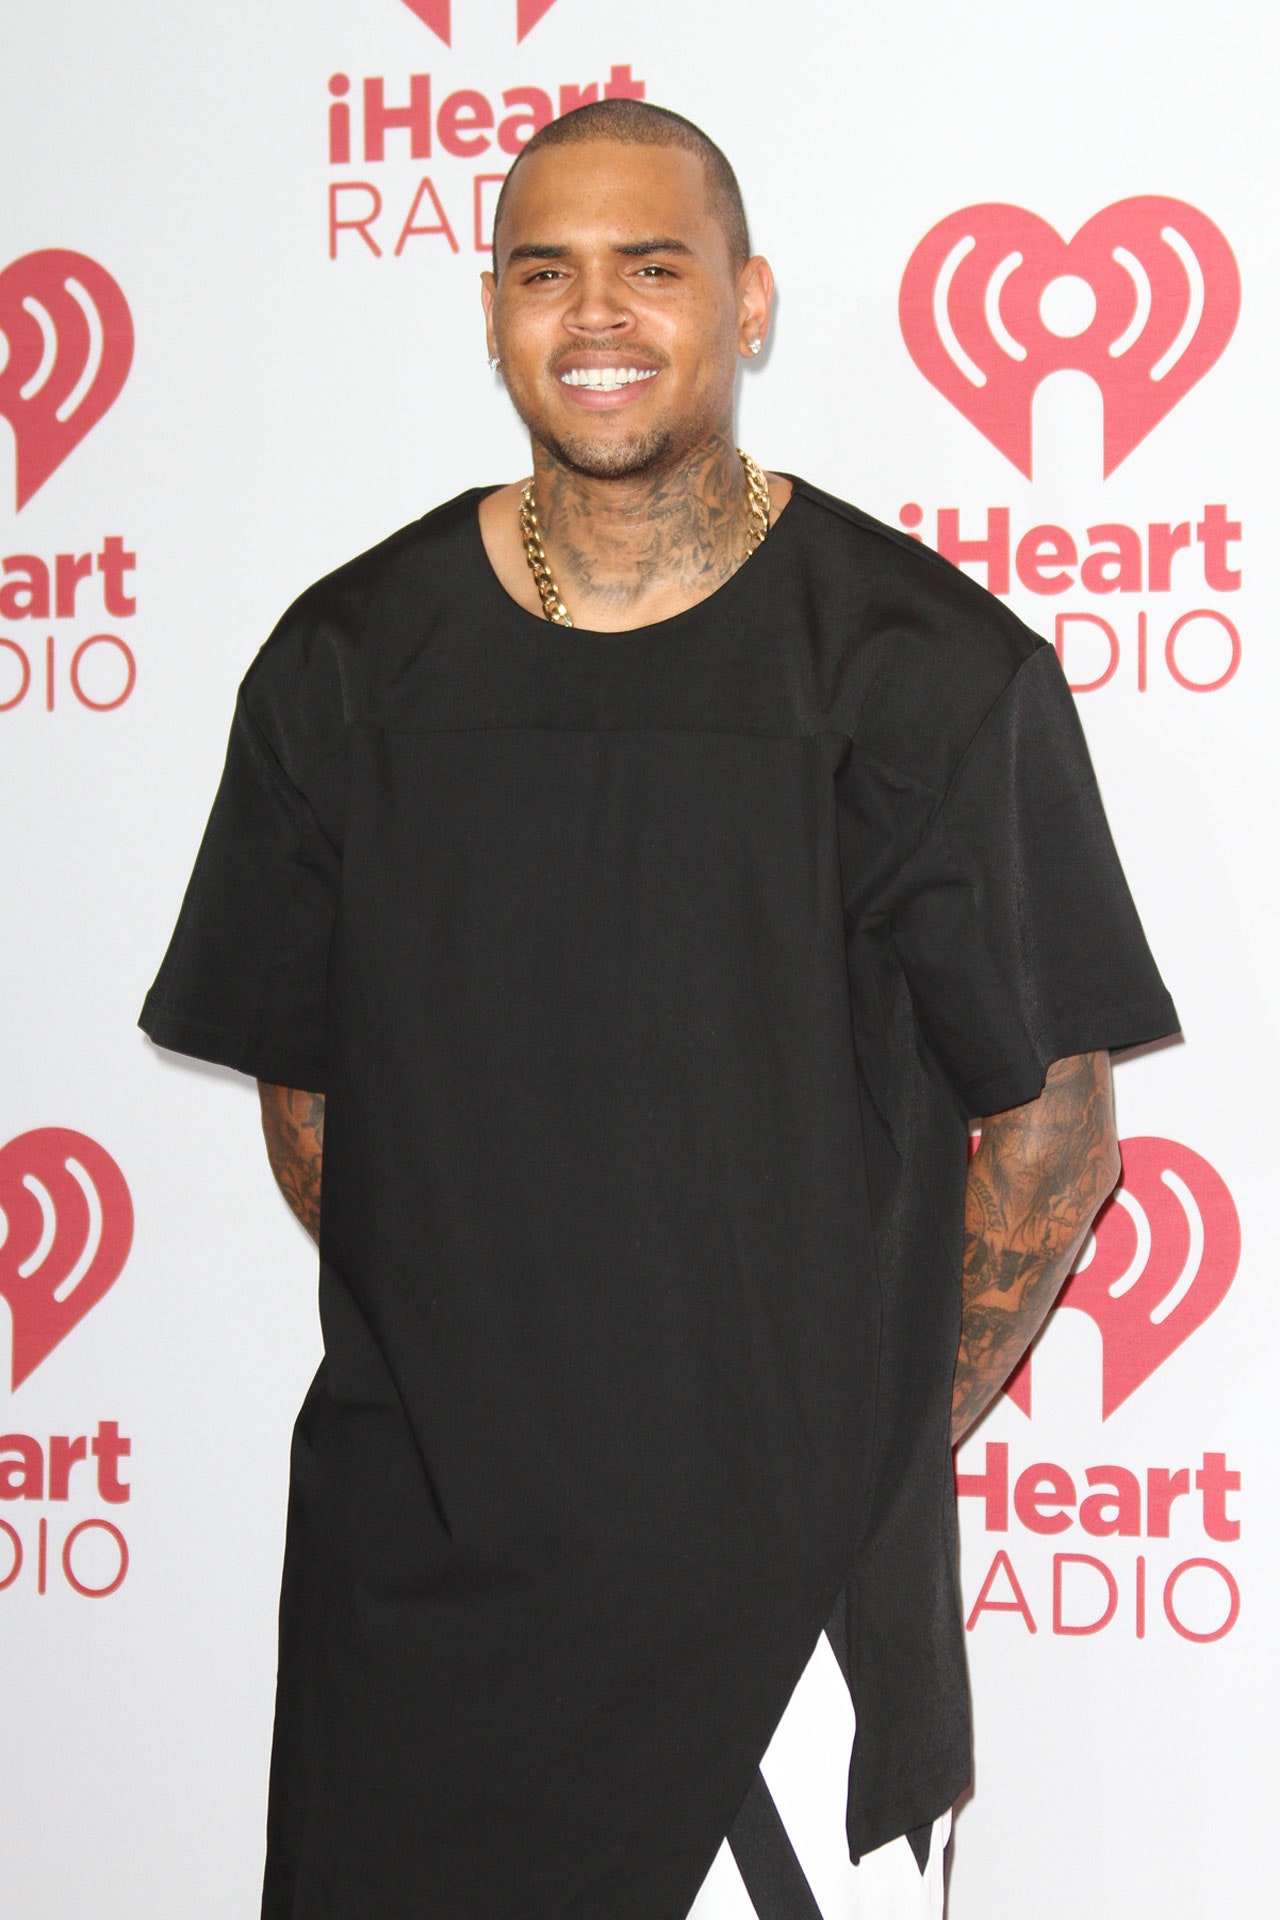 brenton cunning recommends chris brown dic pic pic